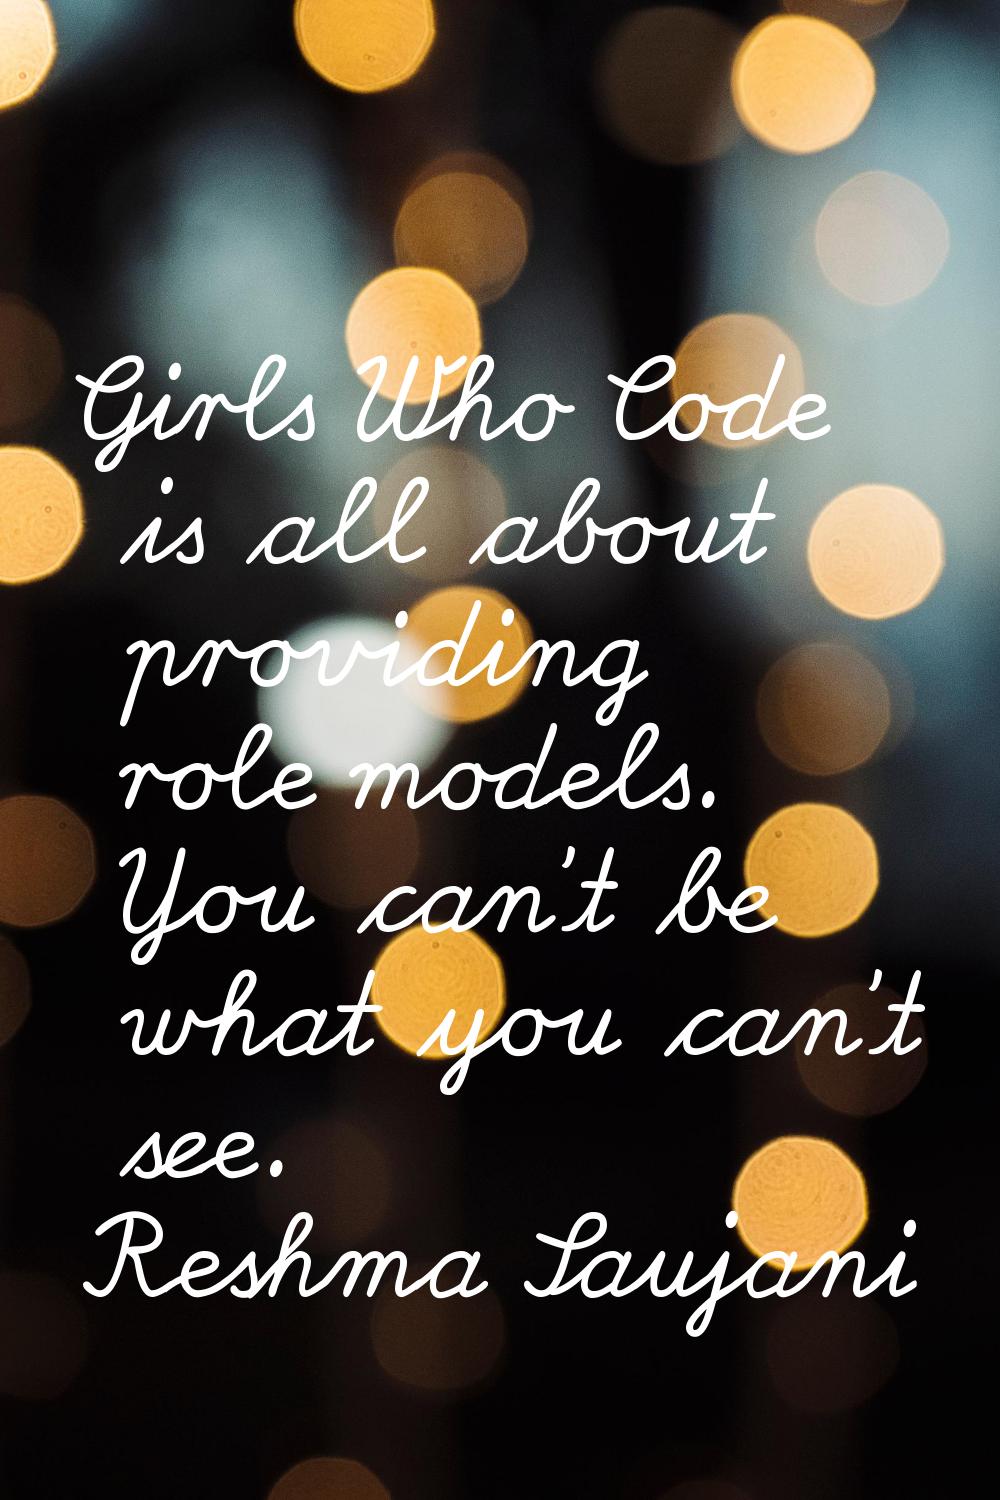 Girls Who Code is all about providing role models. You can't be what you can't see.